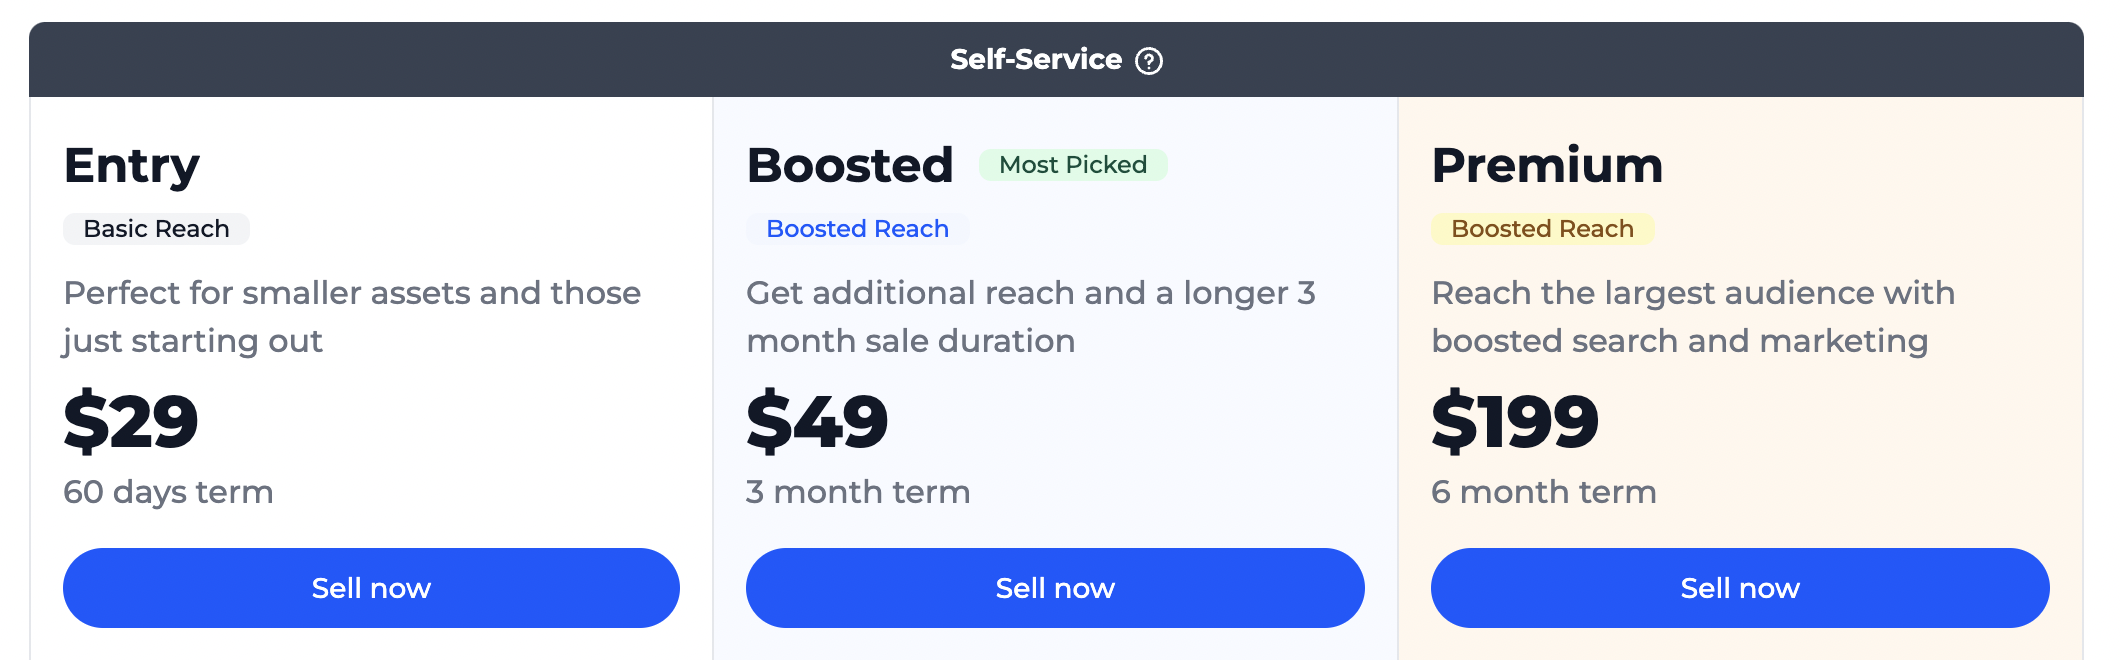 Pricing page on Flippa